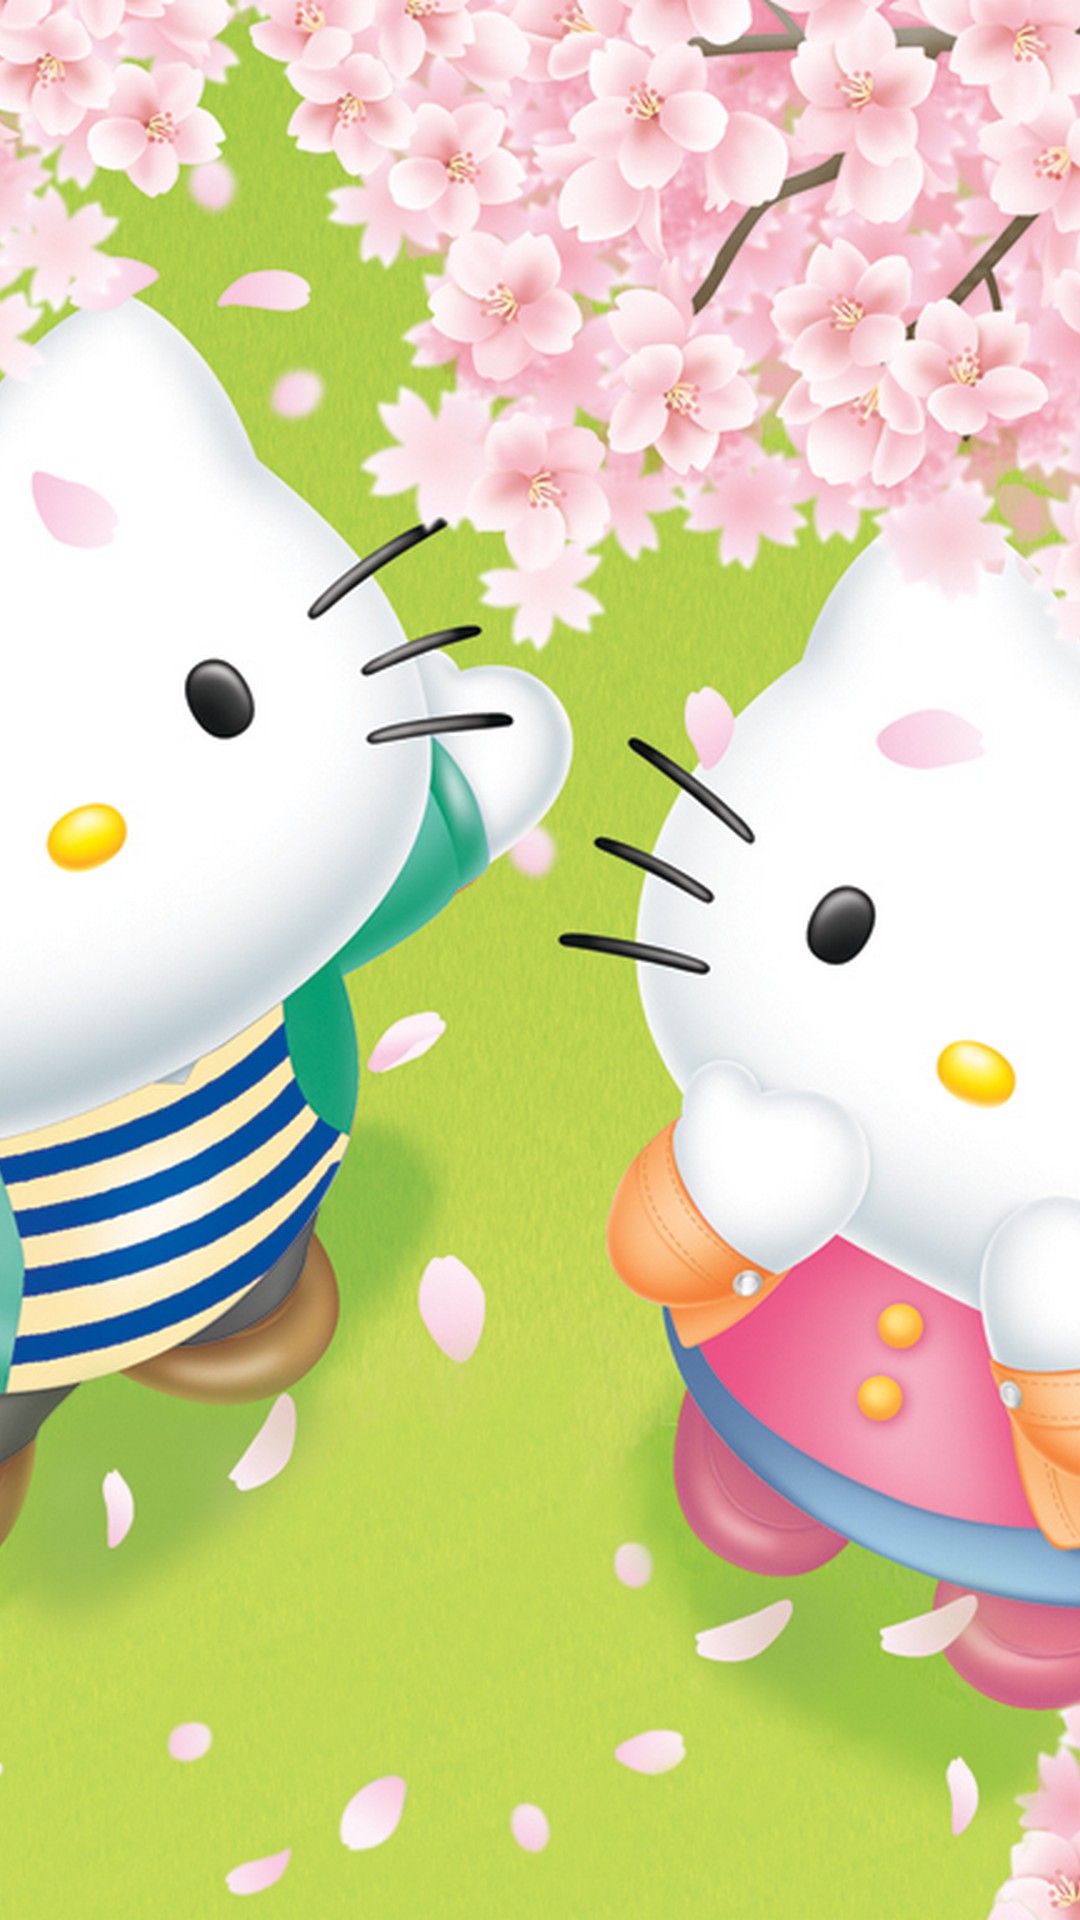 Wallpaper Android Hello Kitty with image resolution 1080x1920 pixel. You can make this wallpaper for your Android backgrounds, Tablet, Smartphones Screensavers and Mobile Phone Lock Screen